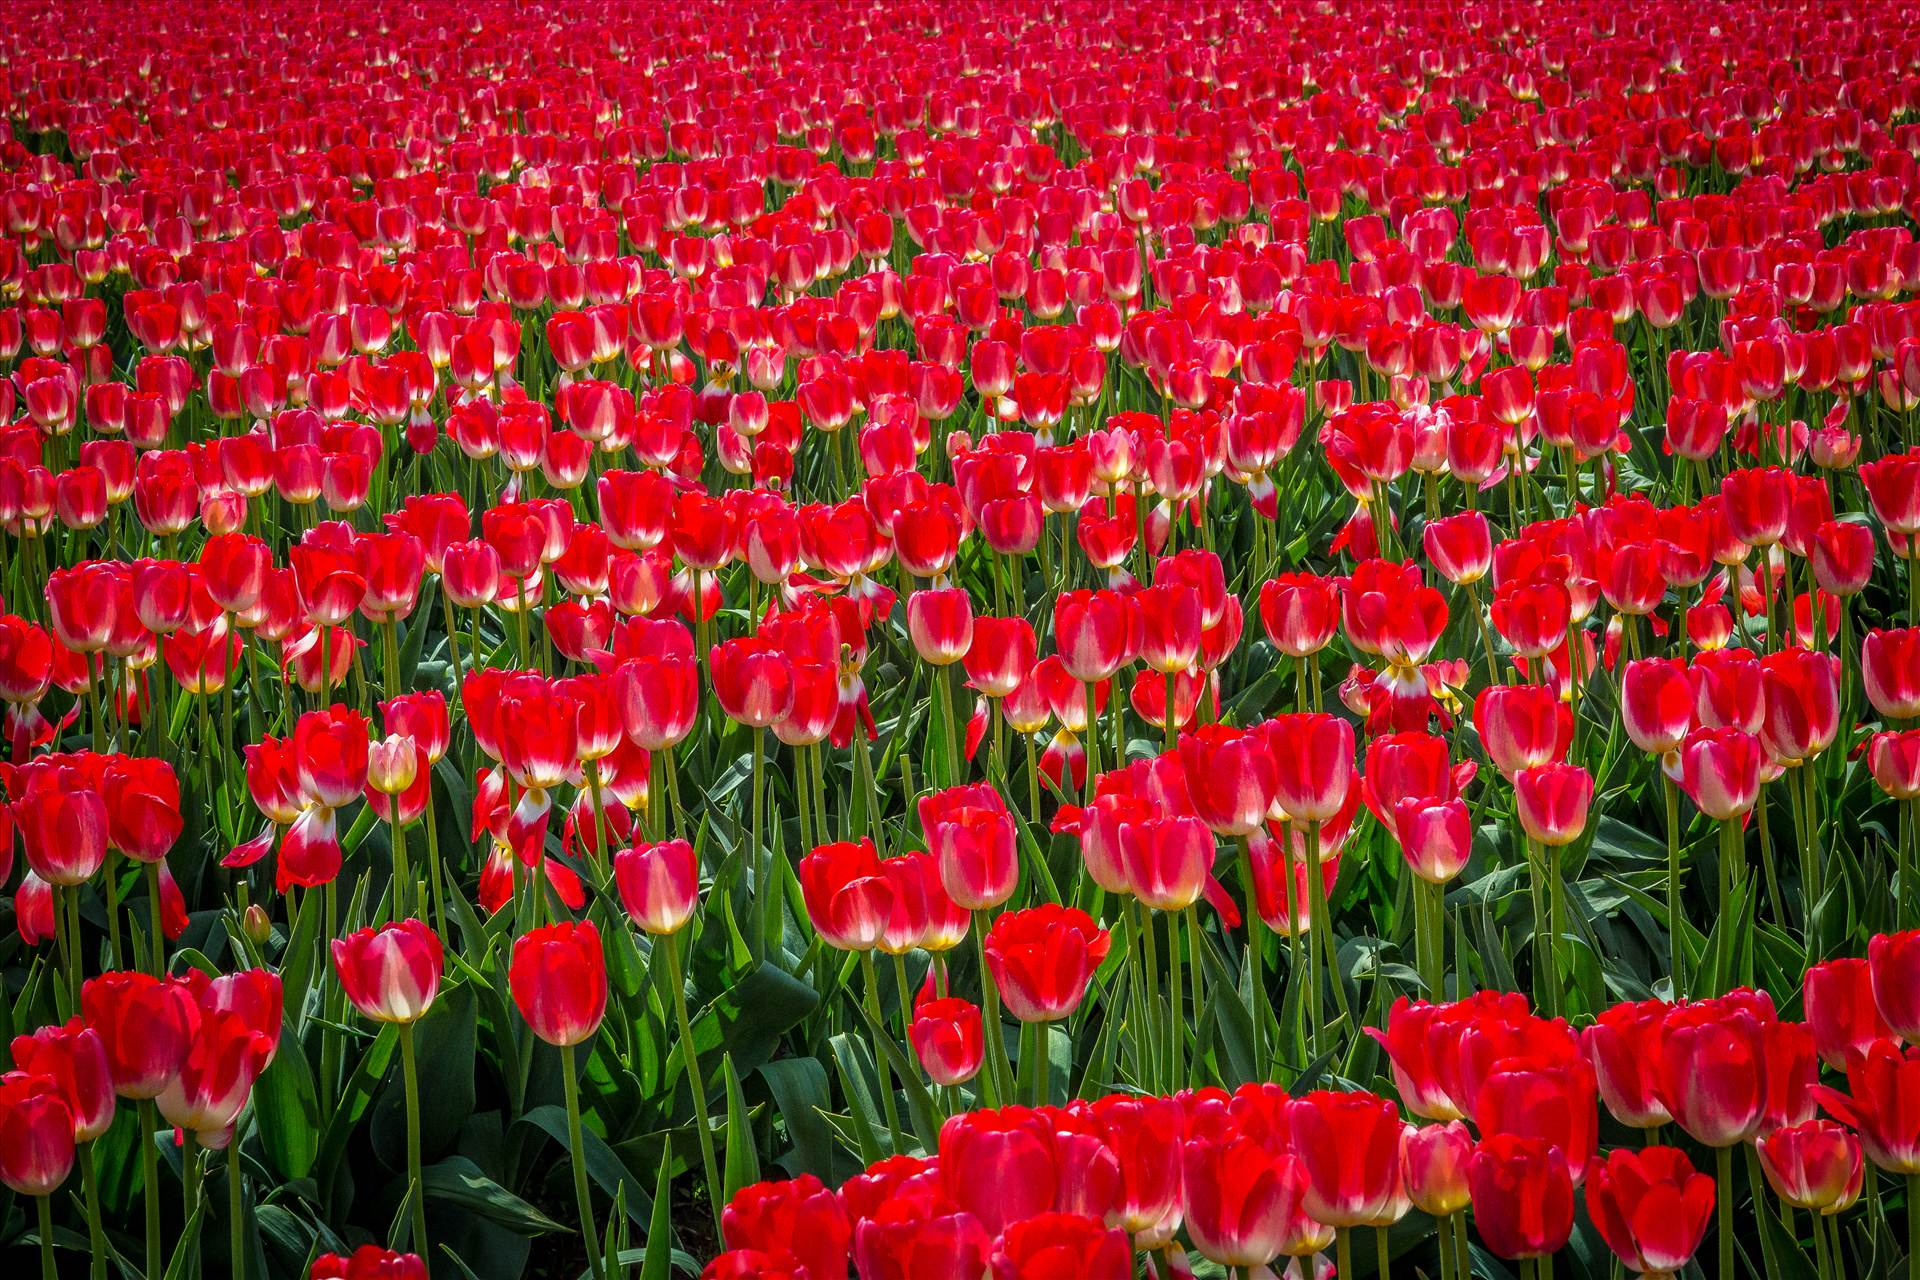 Sea of Red Tulips From the Skagit County Tulip Festival in Washington state. by Scott Smith Photos